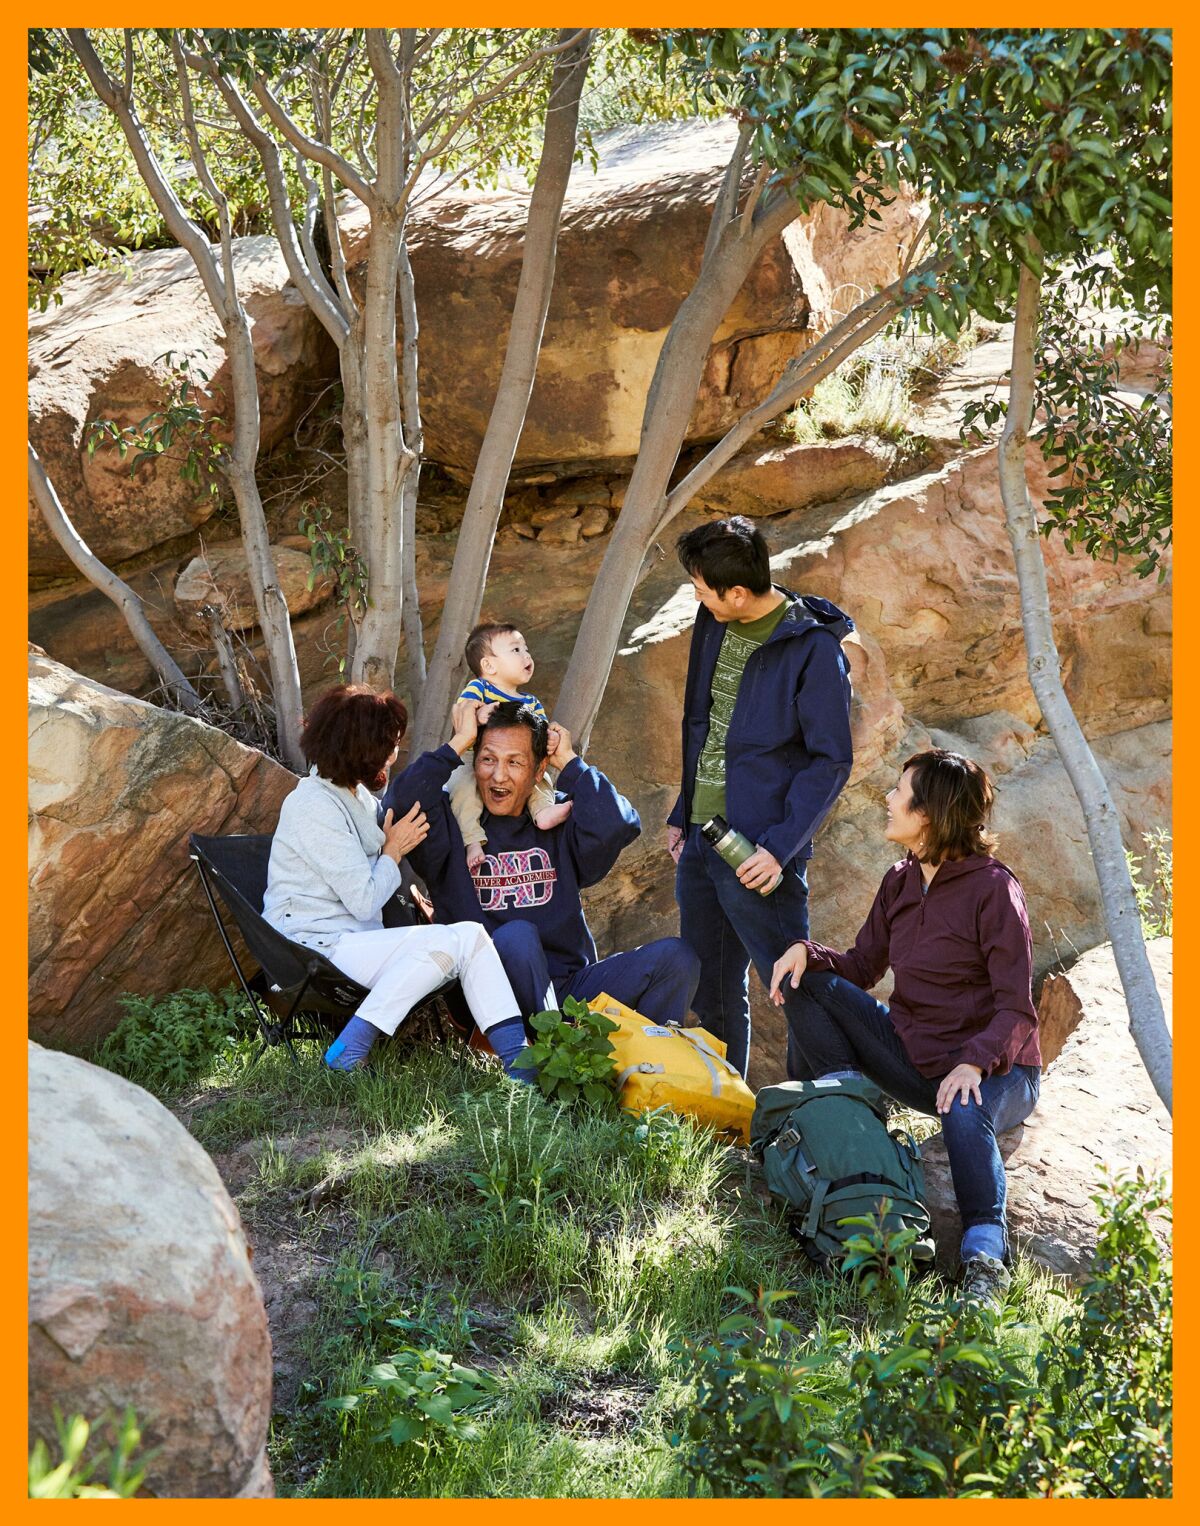 A family rests outdoors among trees and rocks.